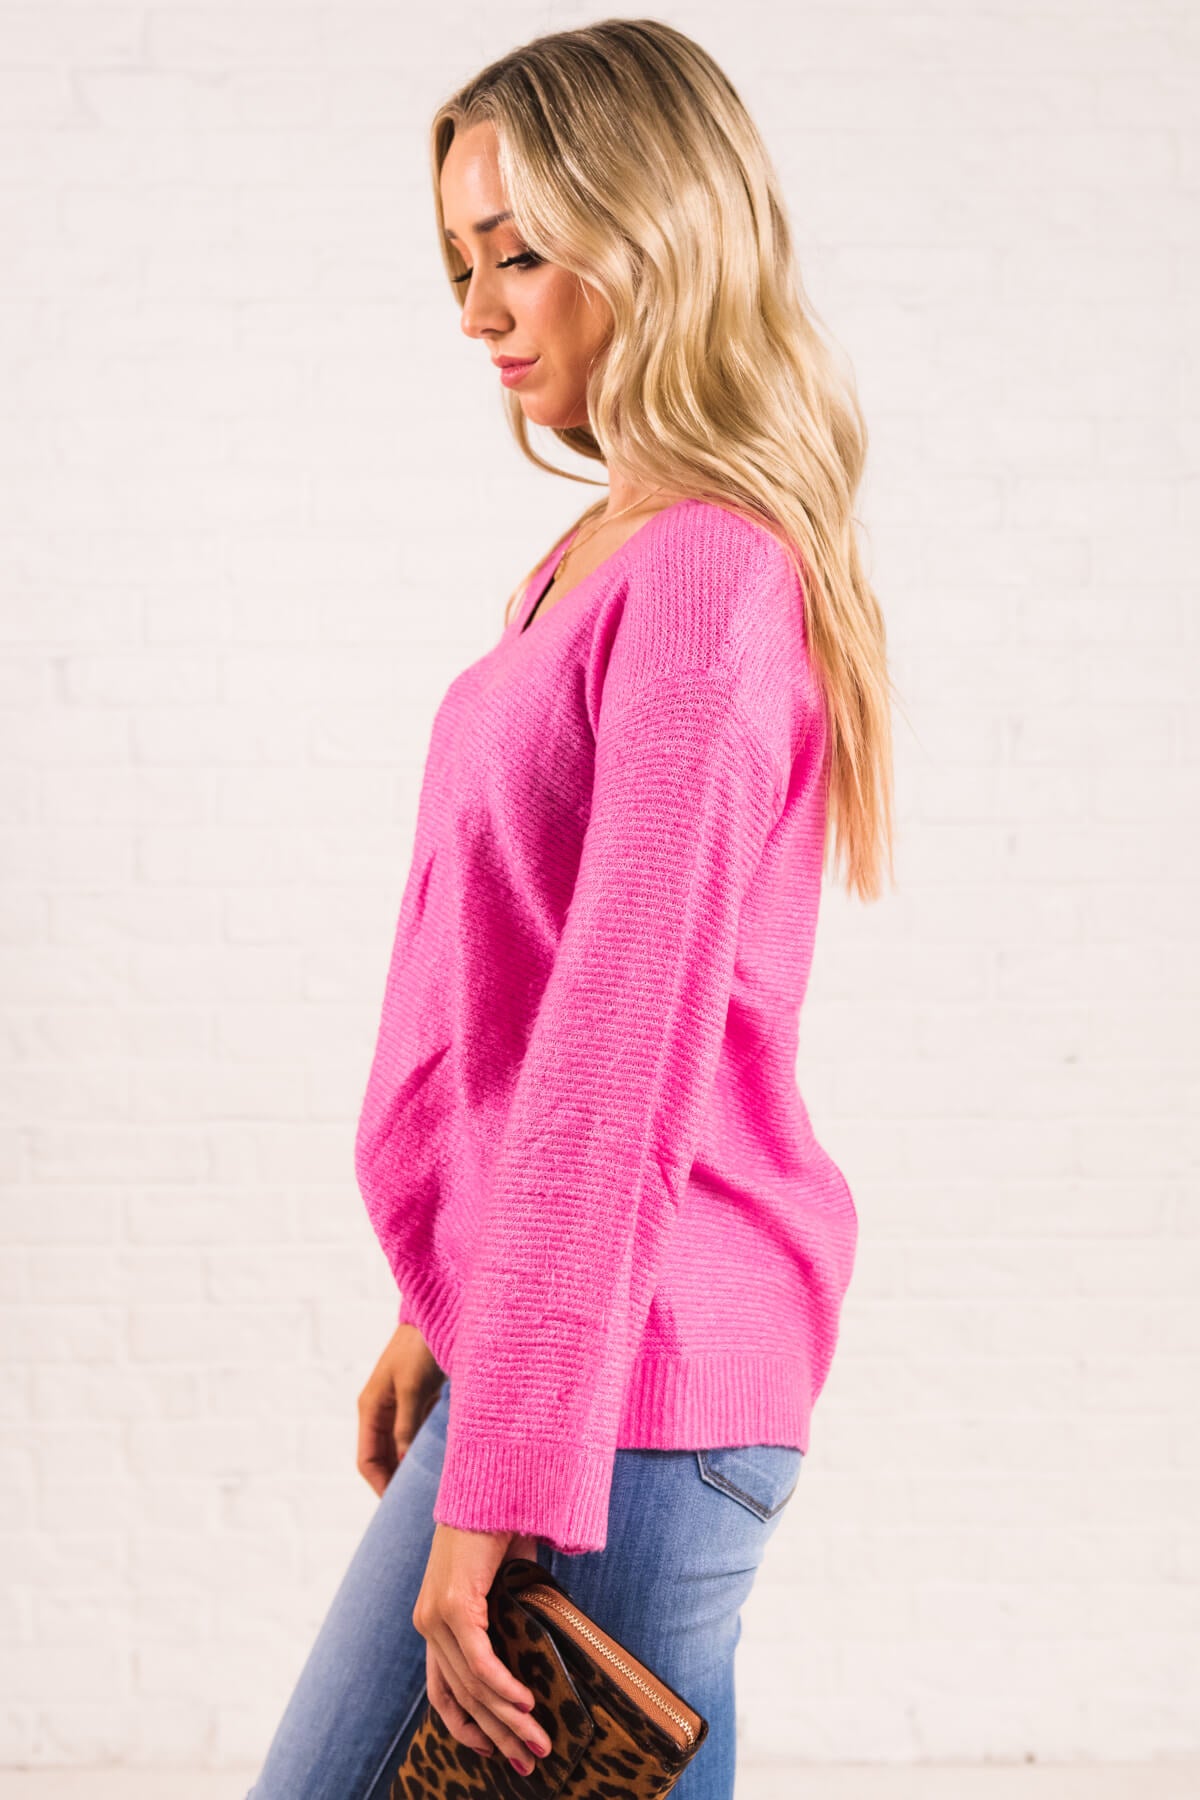 Hot Pink Cute and Comfortable Boutique Sweaters for Women